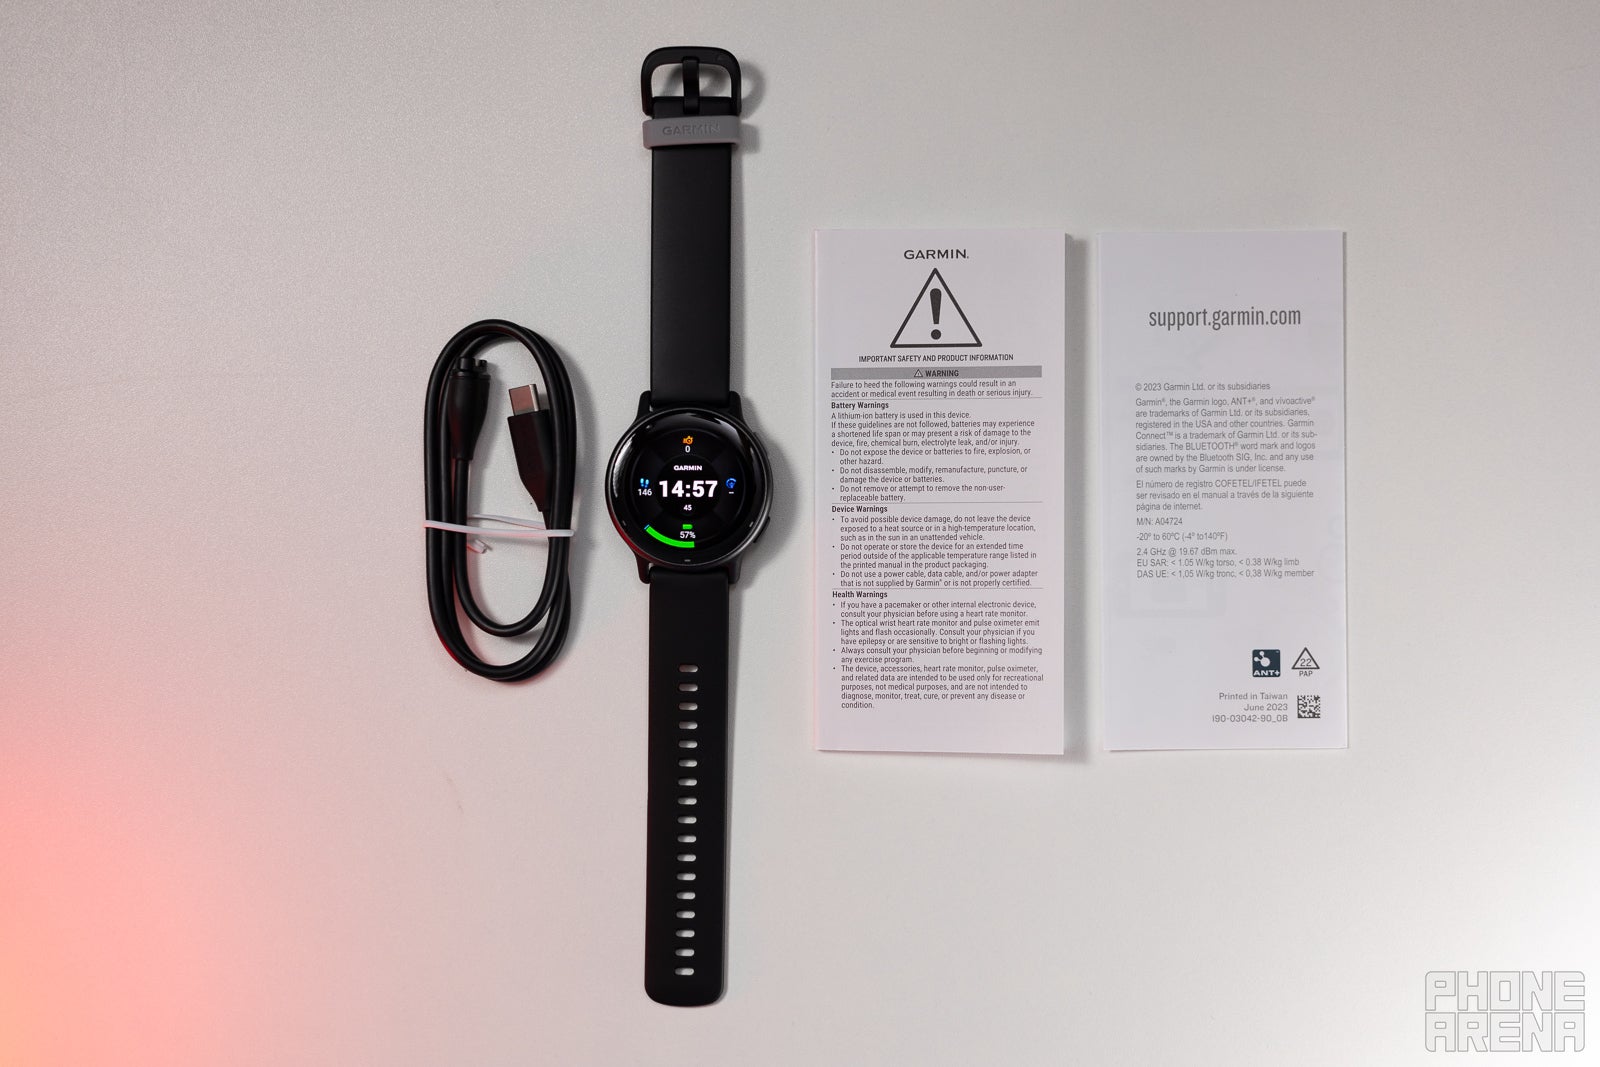 You get a very barebones package with the watch, a charging cable and a user manual (Image by PhoneArena) - Garmin Vivoactive 5 Review: $300 well spent